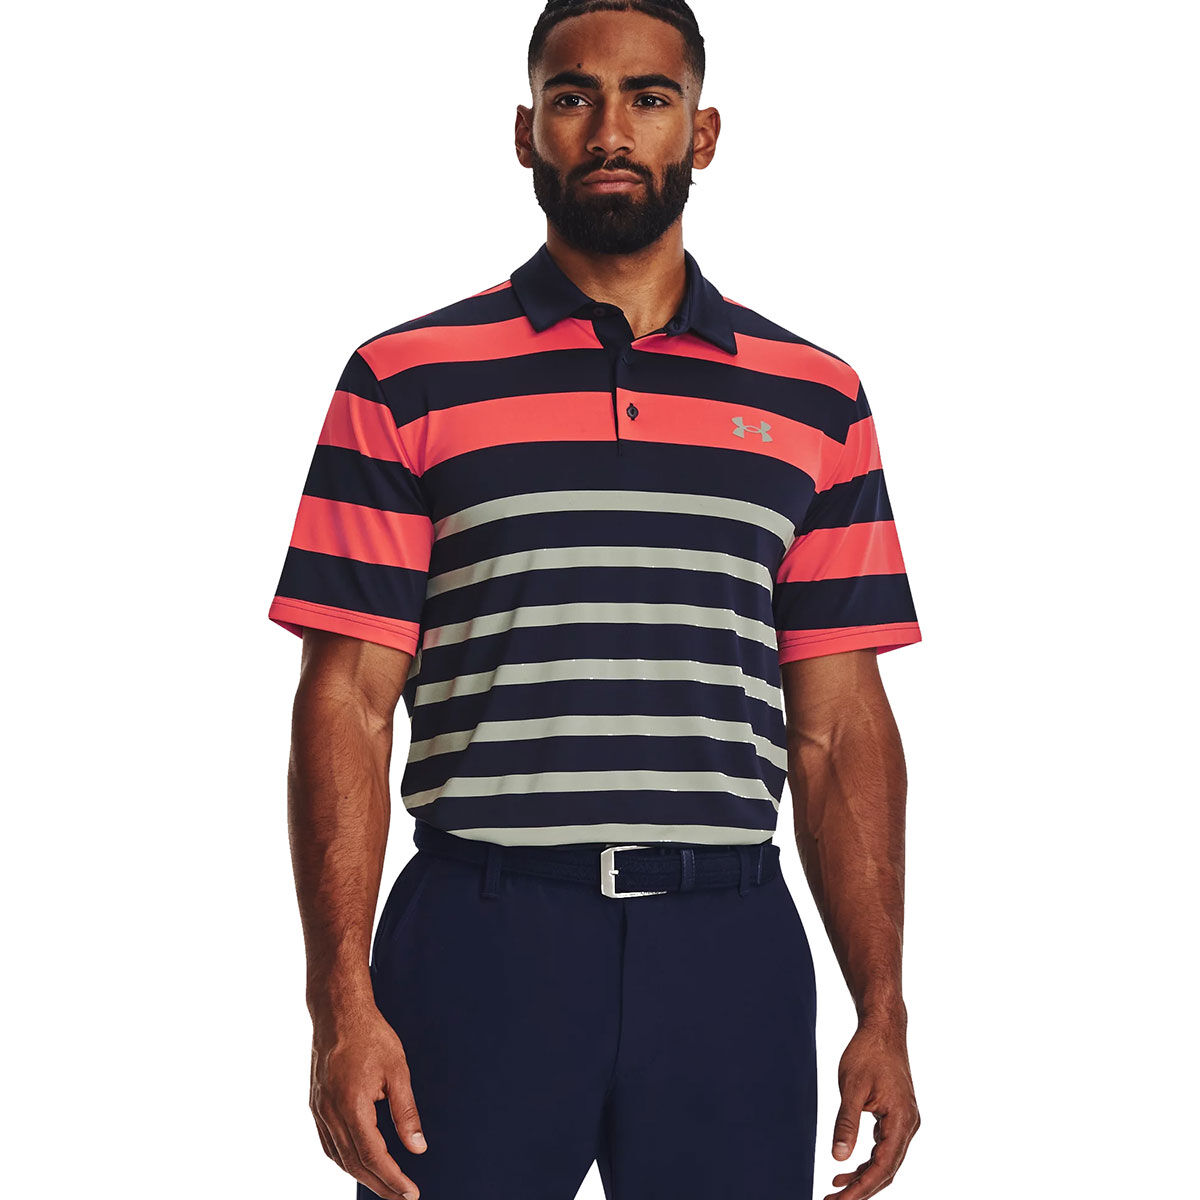 Under Armour Men’s Navy Blue, Red and Green Stripe Playoff 3.0 Golf Polo Shirt, Size: Medium | American Golf